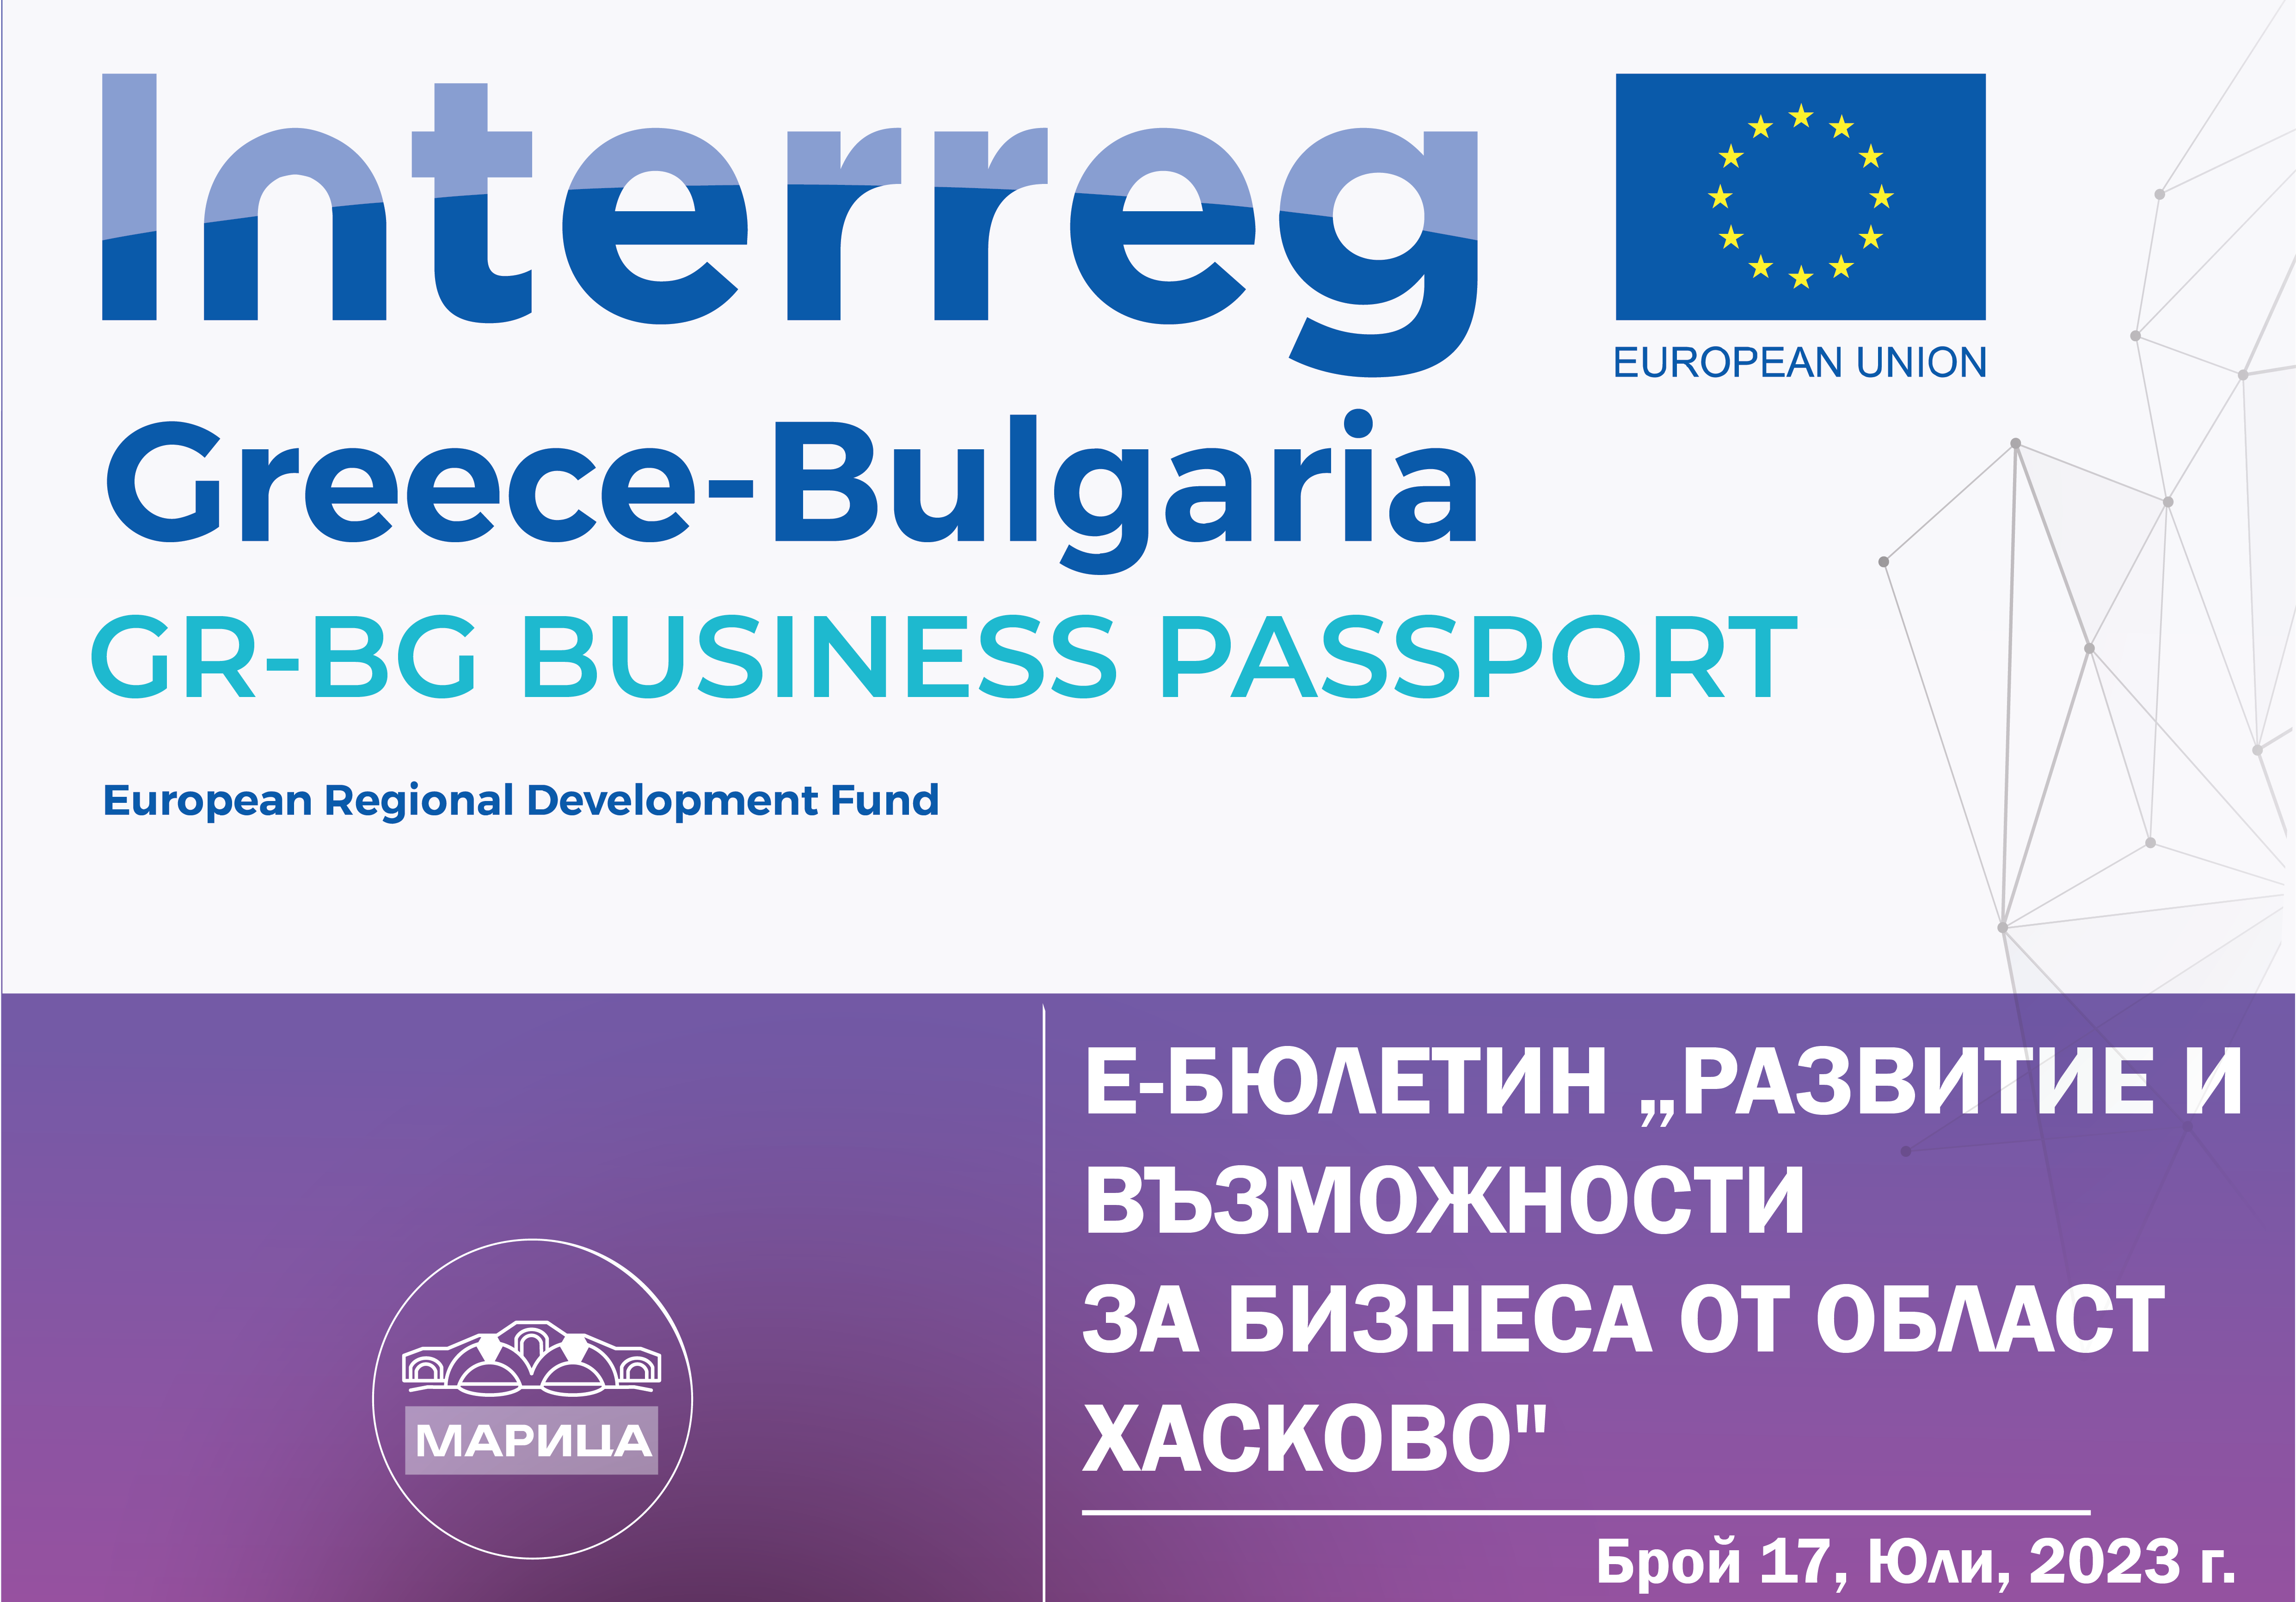 e-newsletter “Development and opportunities for business in the Haskovo region” under a project with the acronym “GR-BG BUSINESS PASSPORT, 17th edition